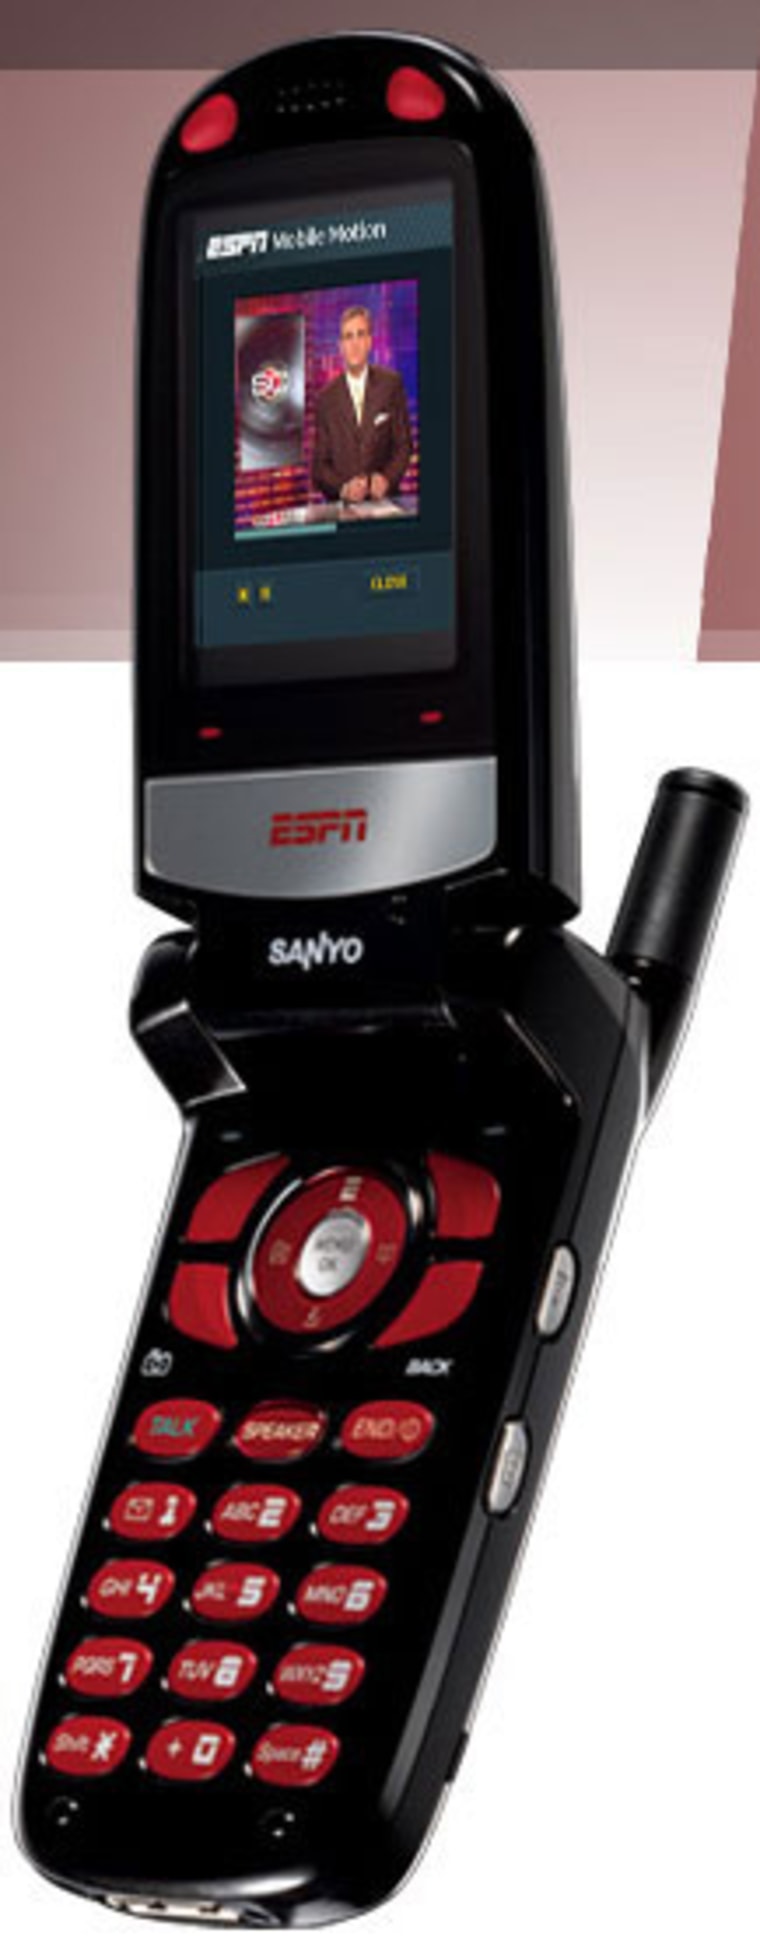 The Mobile ESPN phone is a stunning Sanyo phone in black with red highlights.